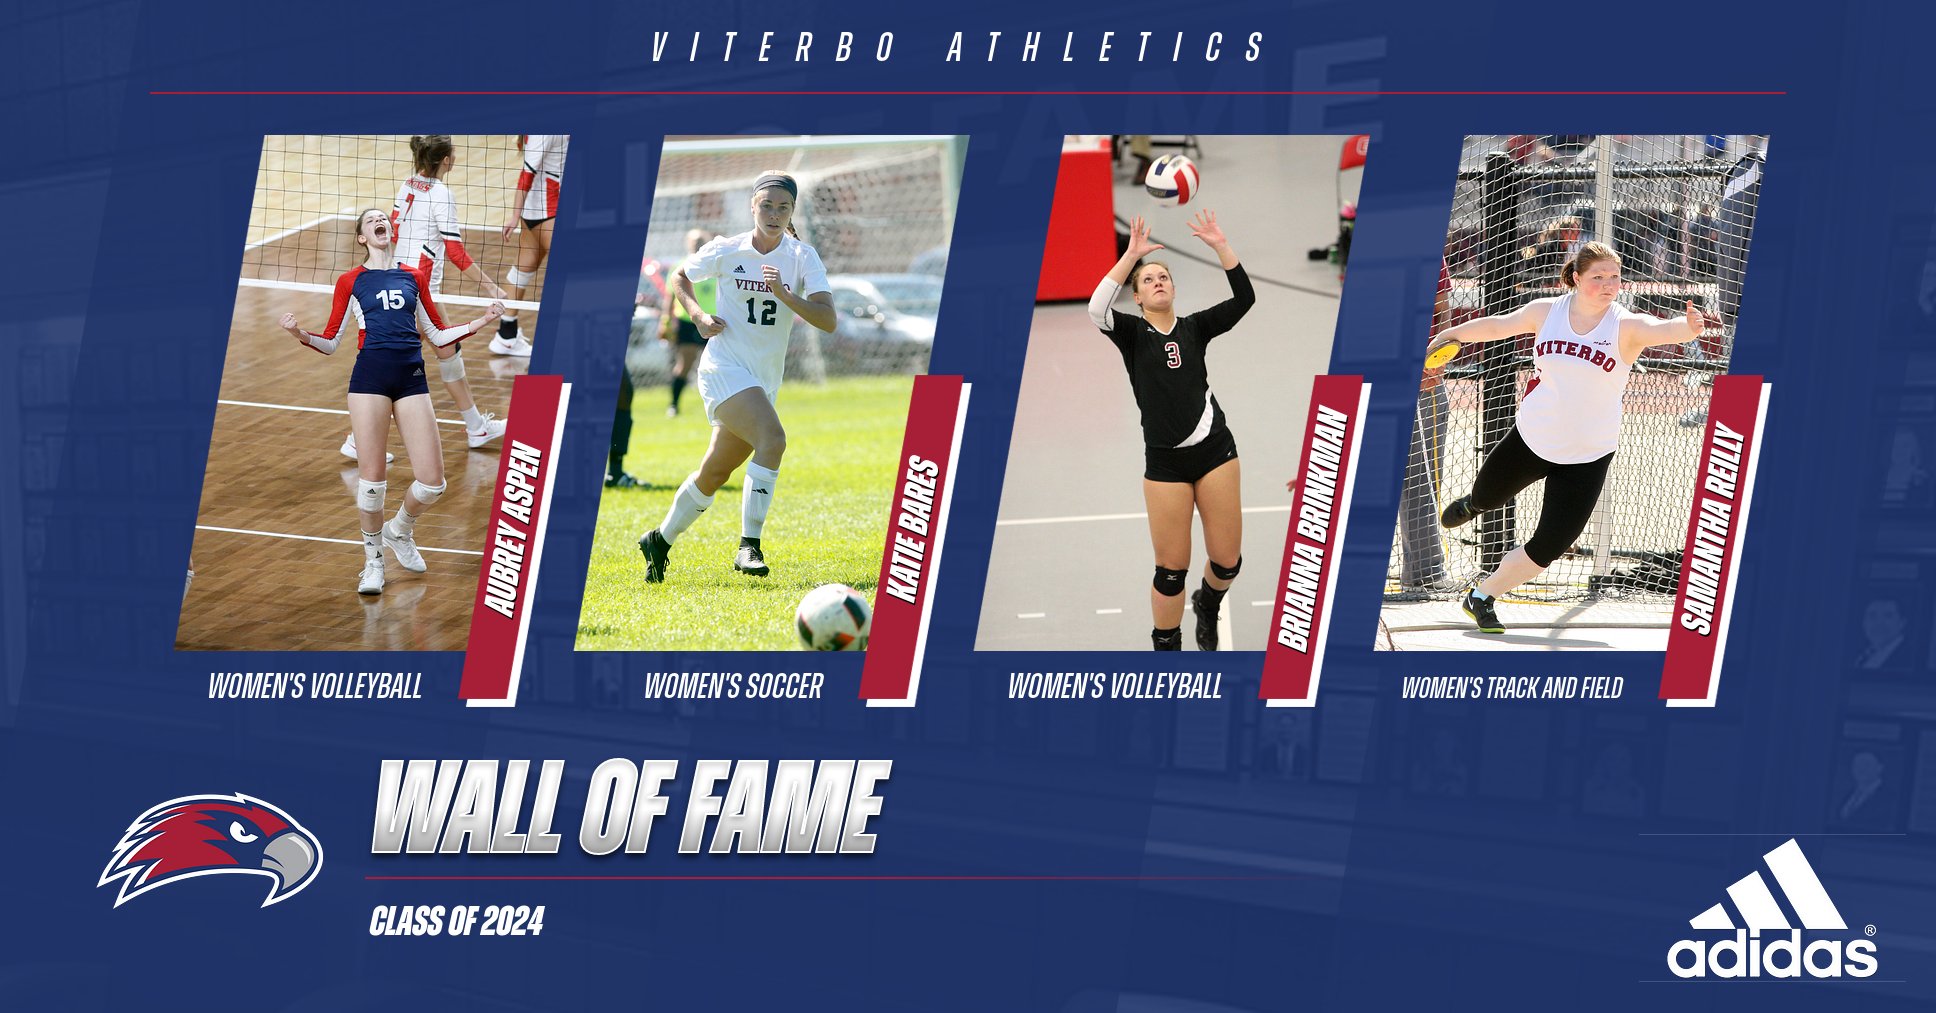 Viterbo Athletics Announces Wall of Fame Class of 2024